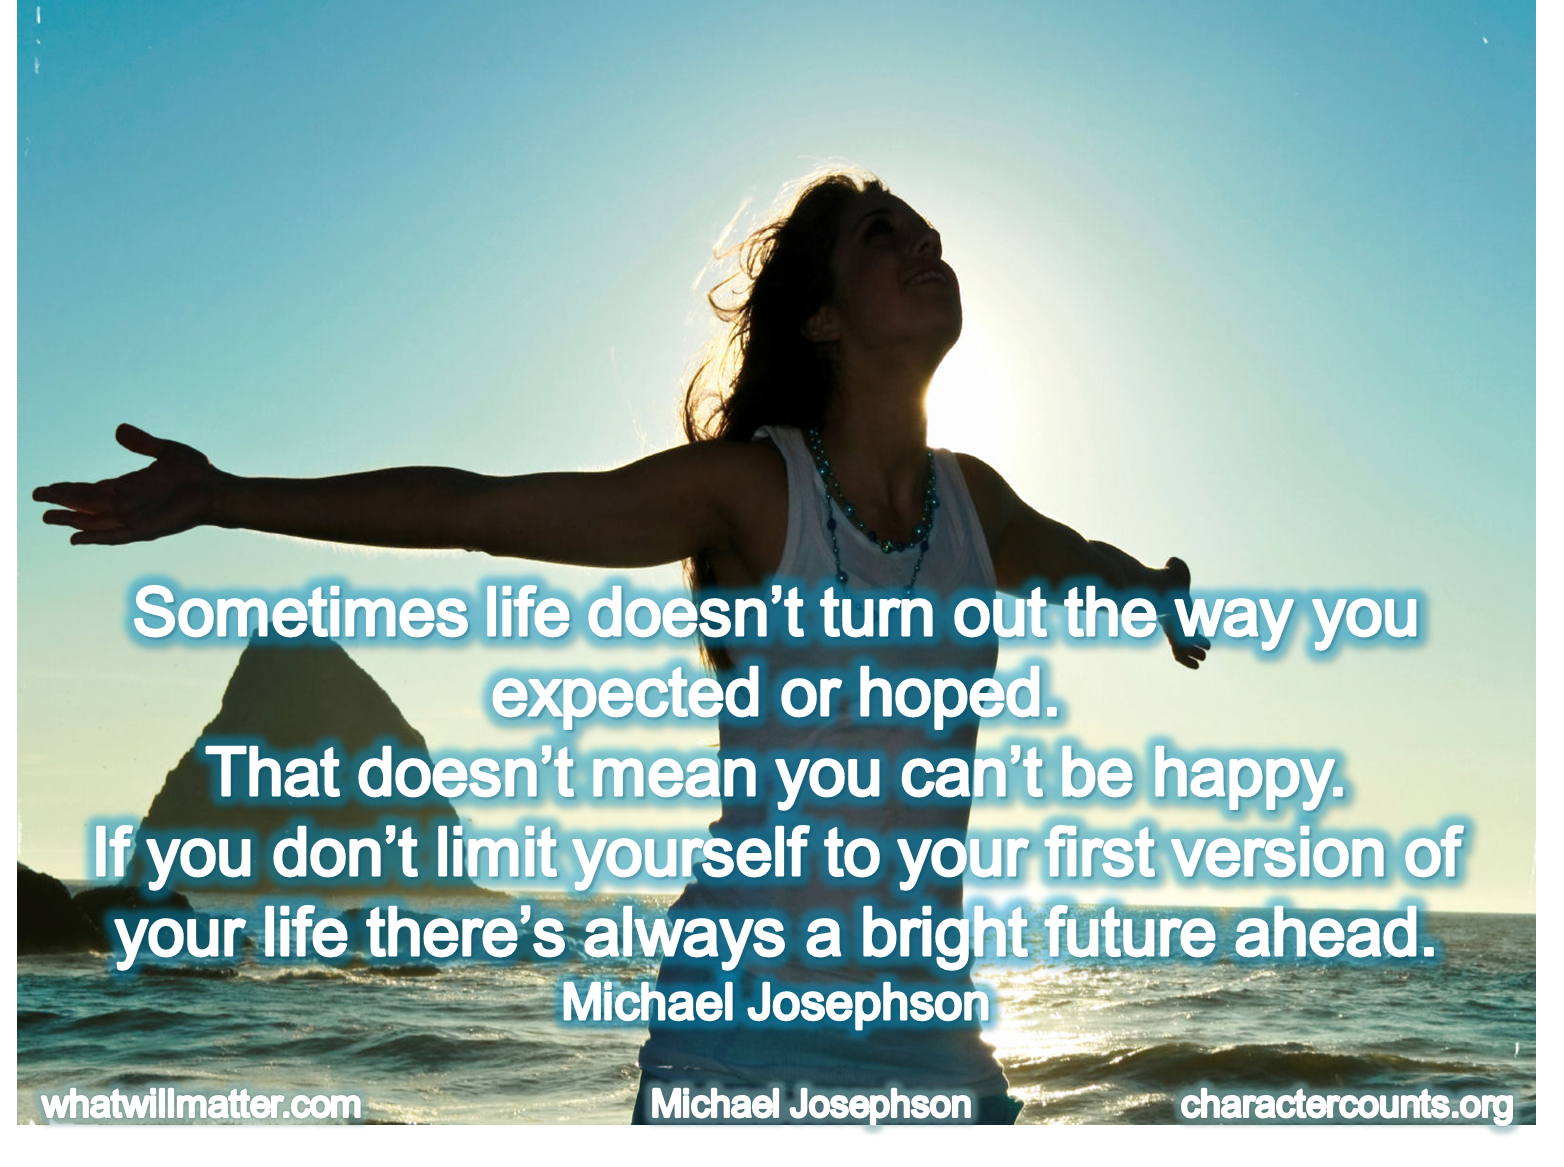 The way you being happy. Bright Future quotes. Sometimes Life. Quotes about Bright Future. Be Happy with the way you are.